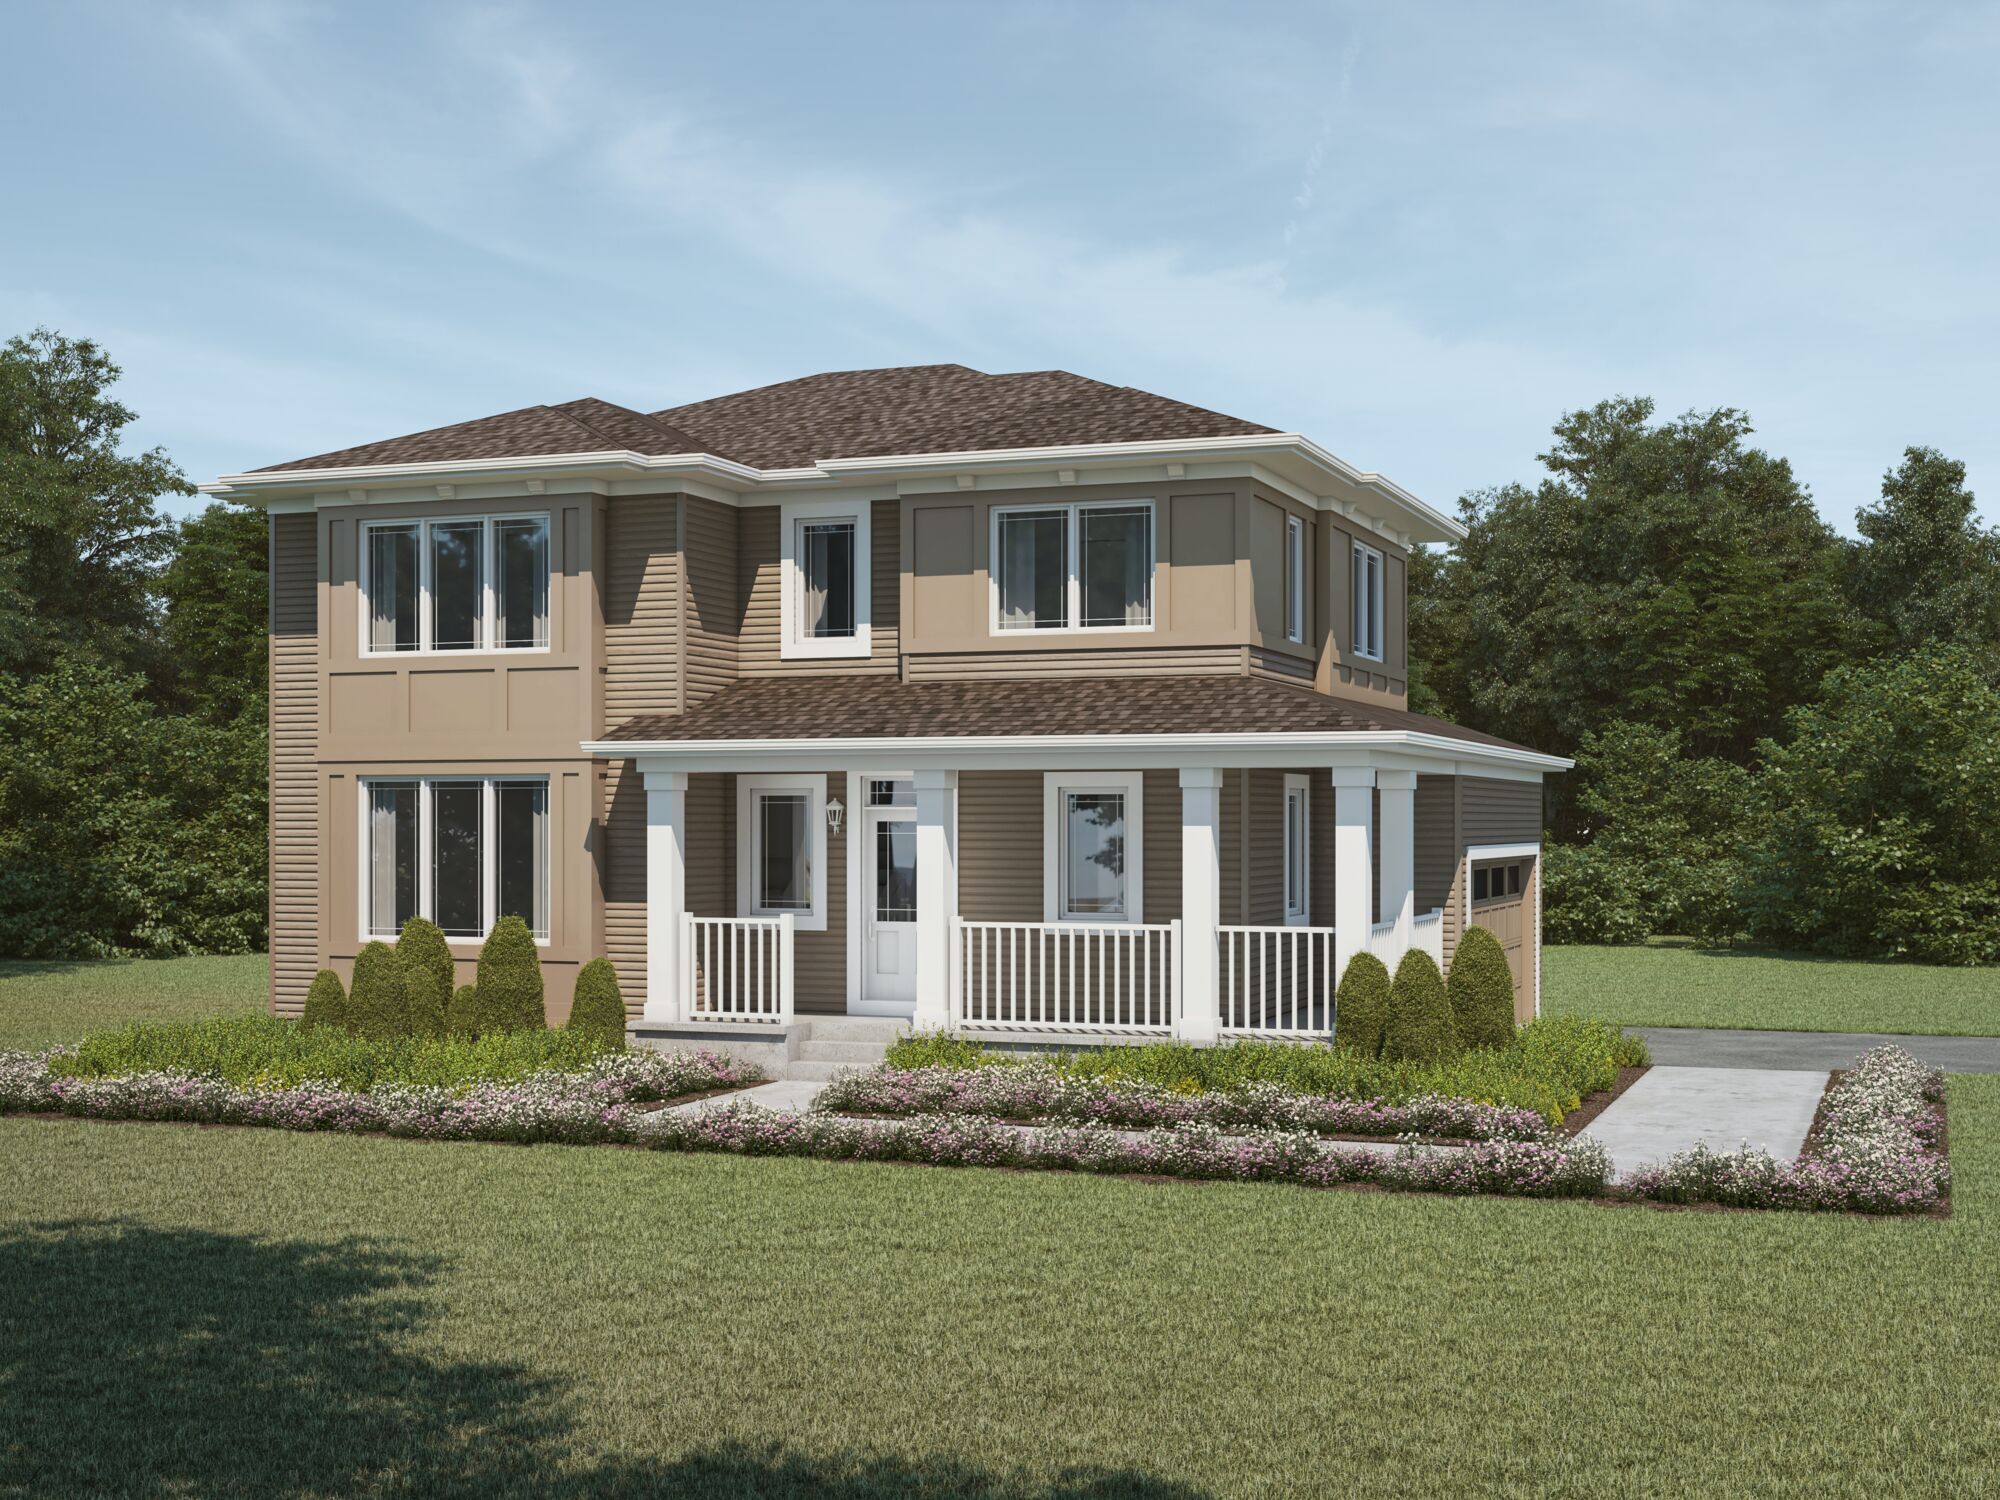 Rendering of the Prairie elevation for the Monarch Model